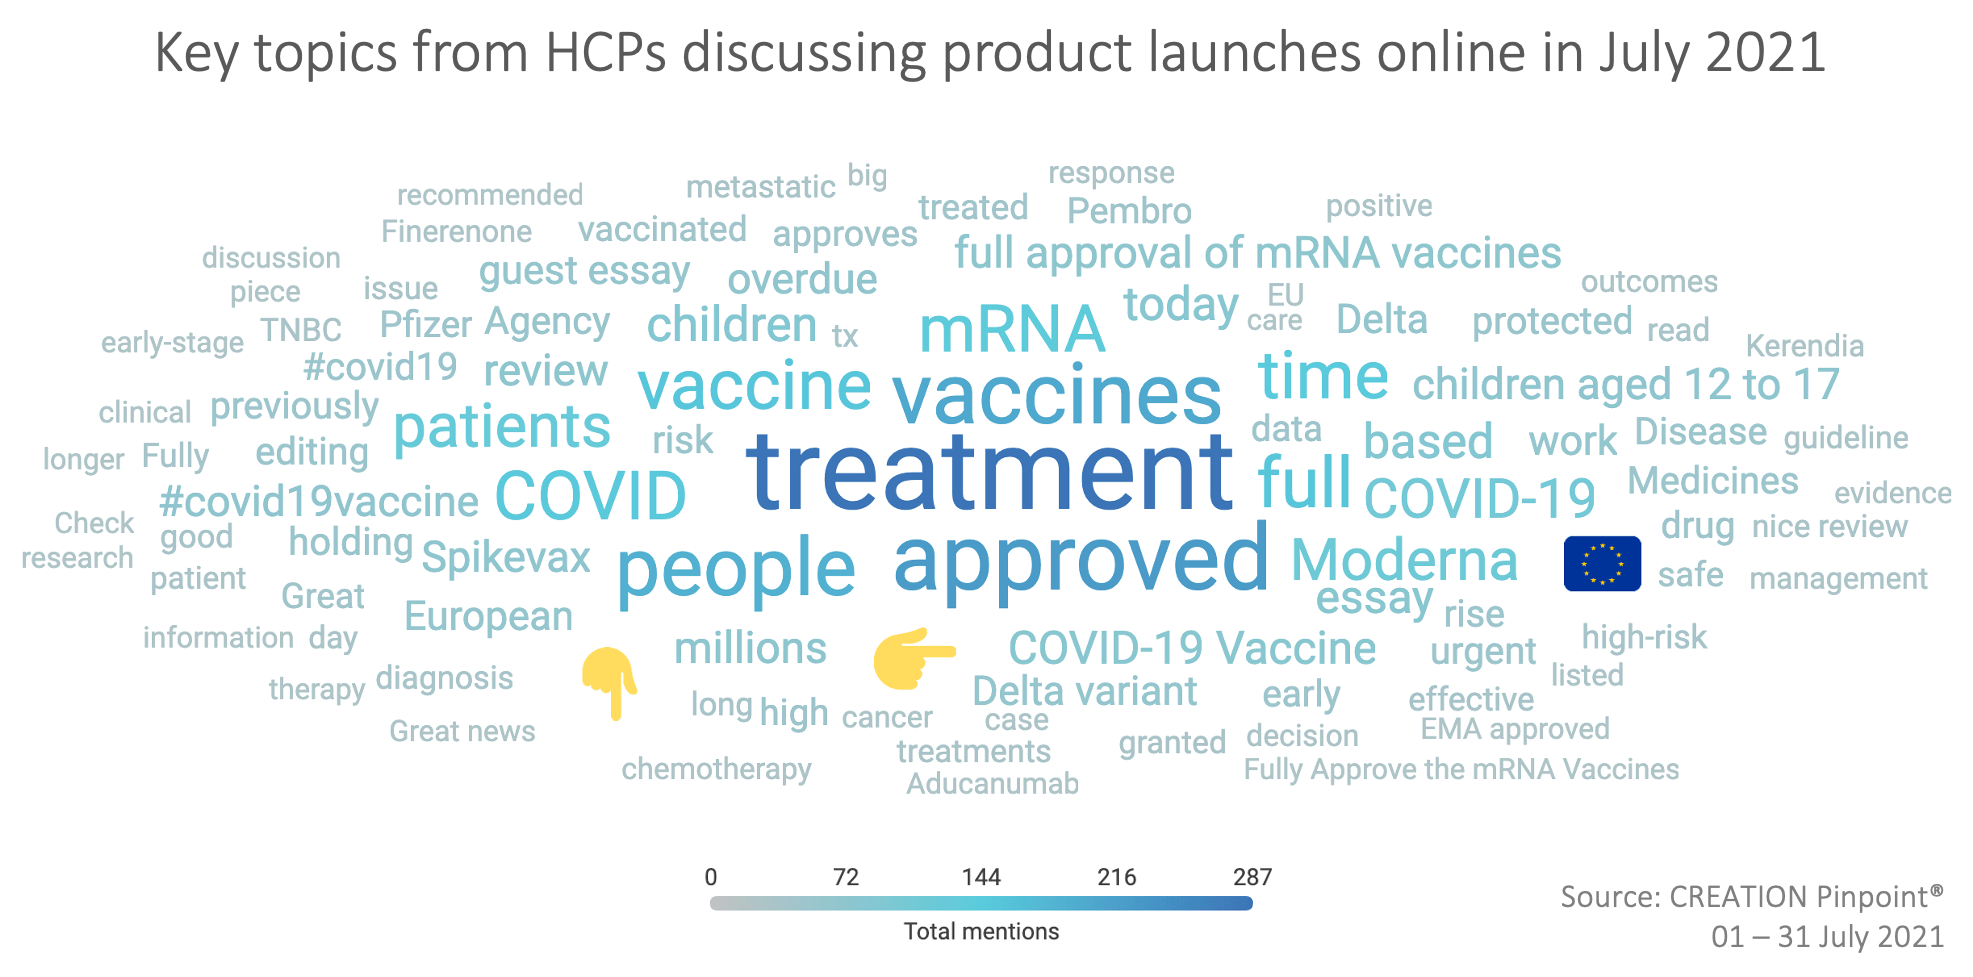 An image showing key topics HCPs discussed in july 2021